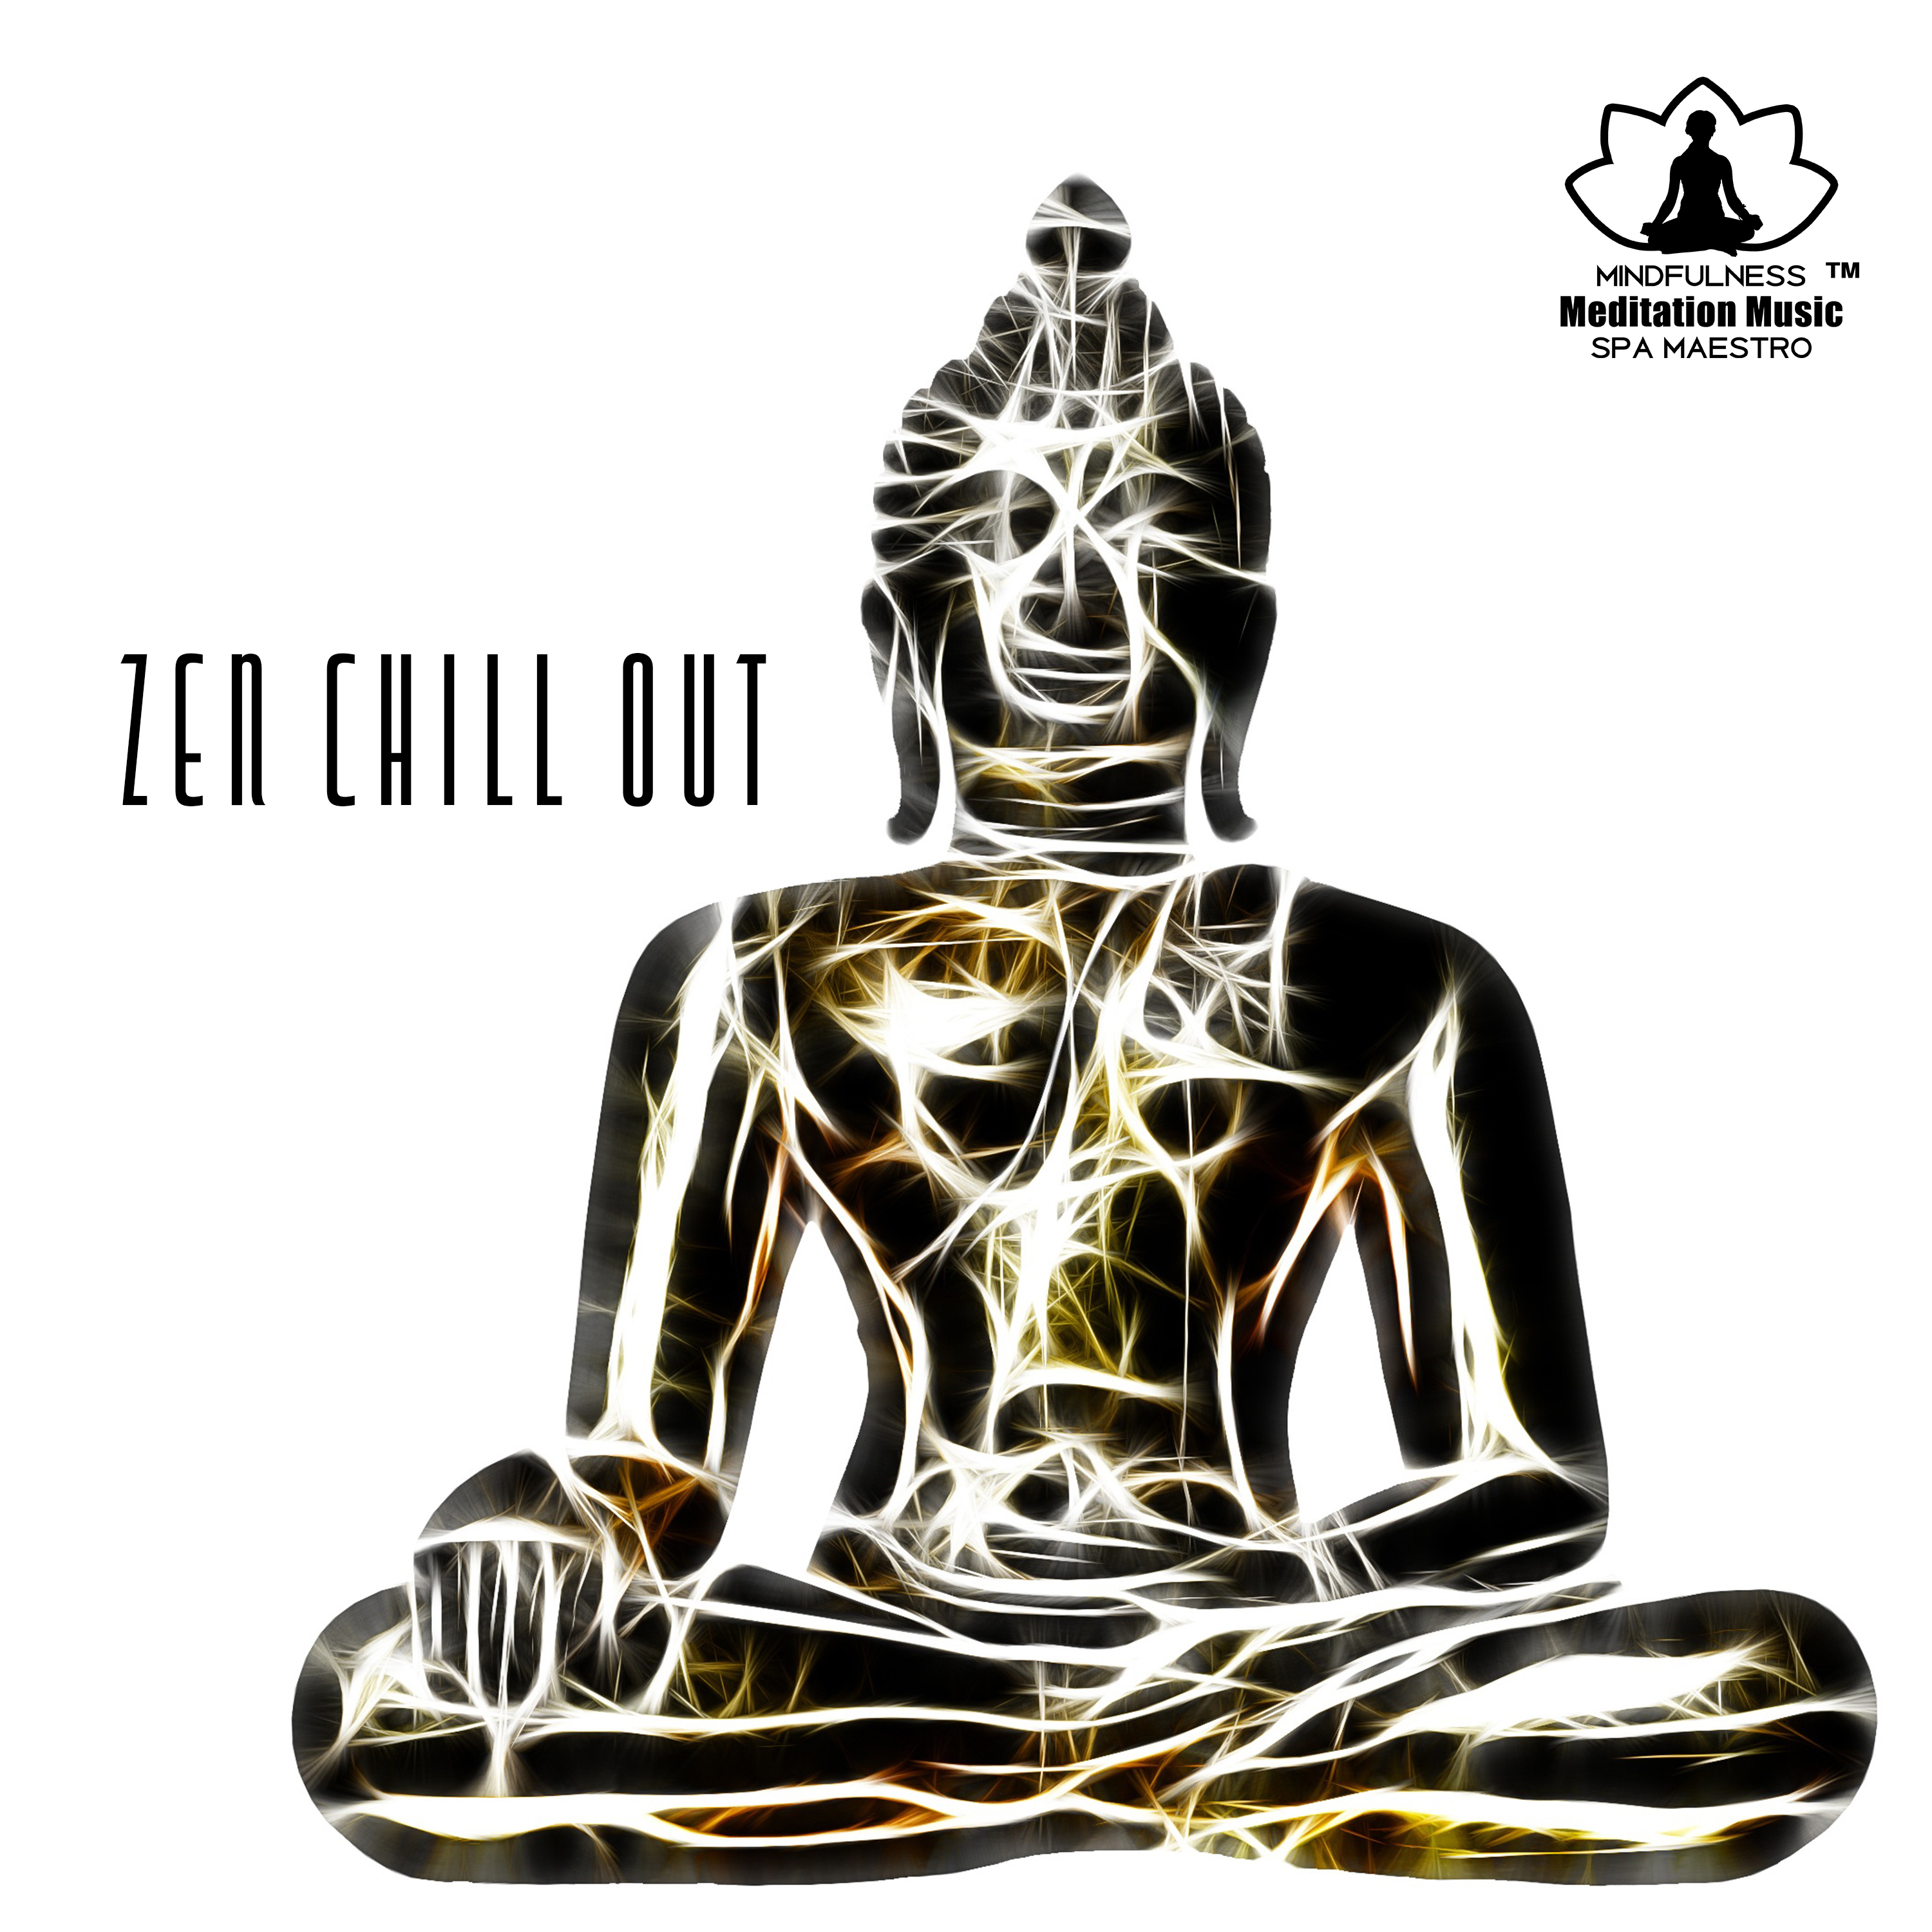 Meditate with Chill Out Music